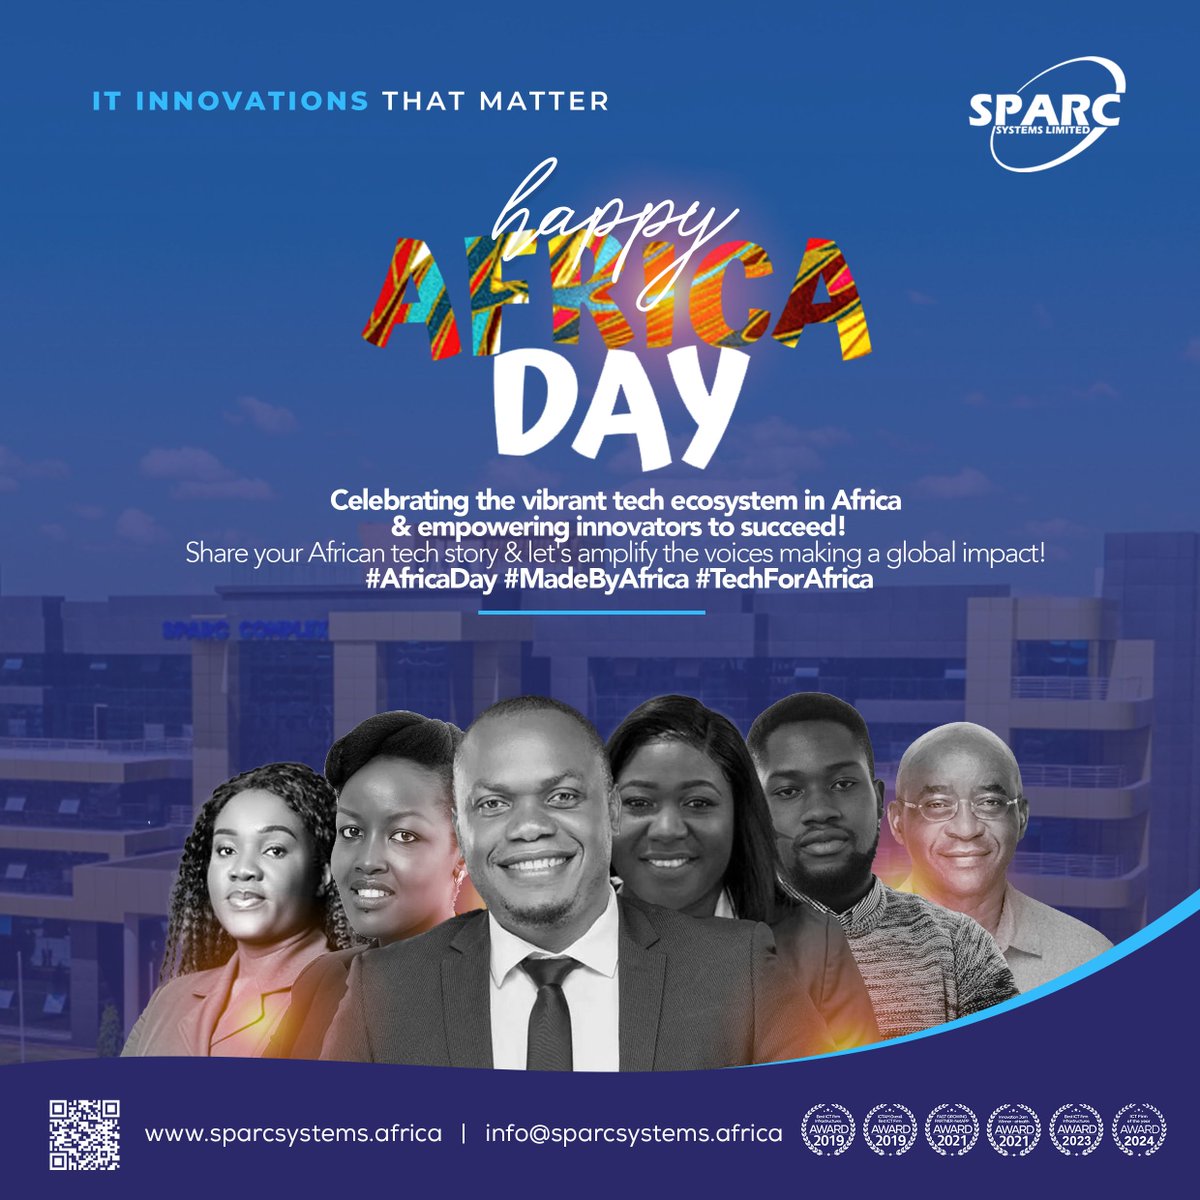 One Africa, One Voice, One Digital Future! Celebrating our continent's unity and technological progress #AfricaDay #PanAfricanism #ITCompanyAfrica #sparctheundisputed